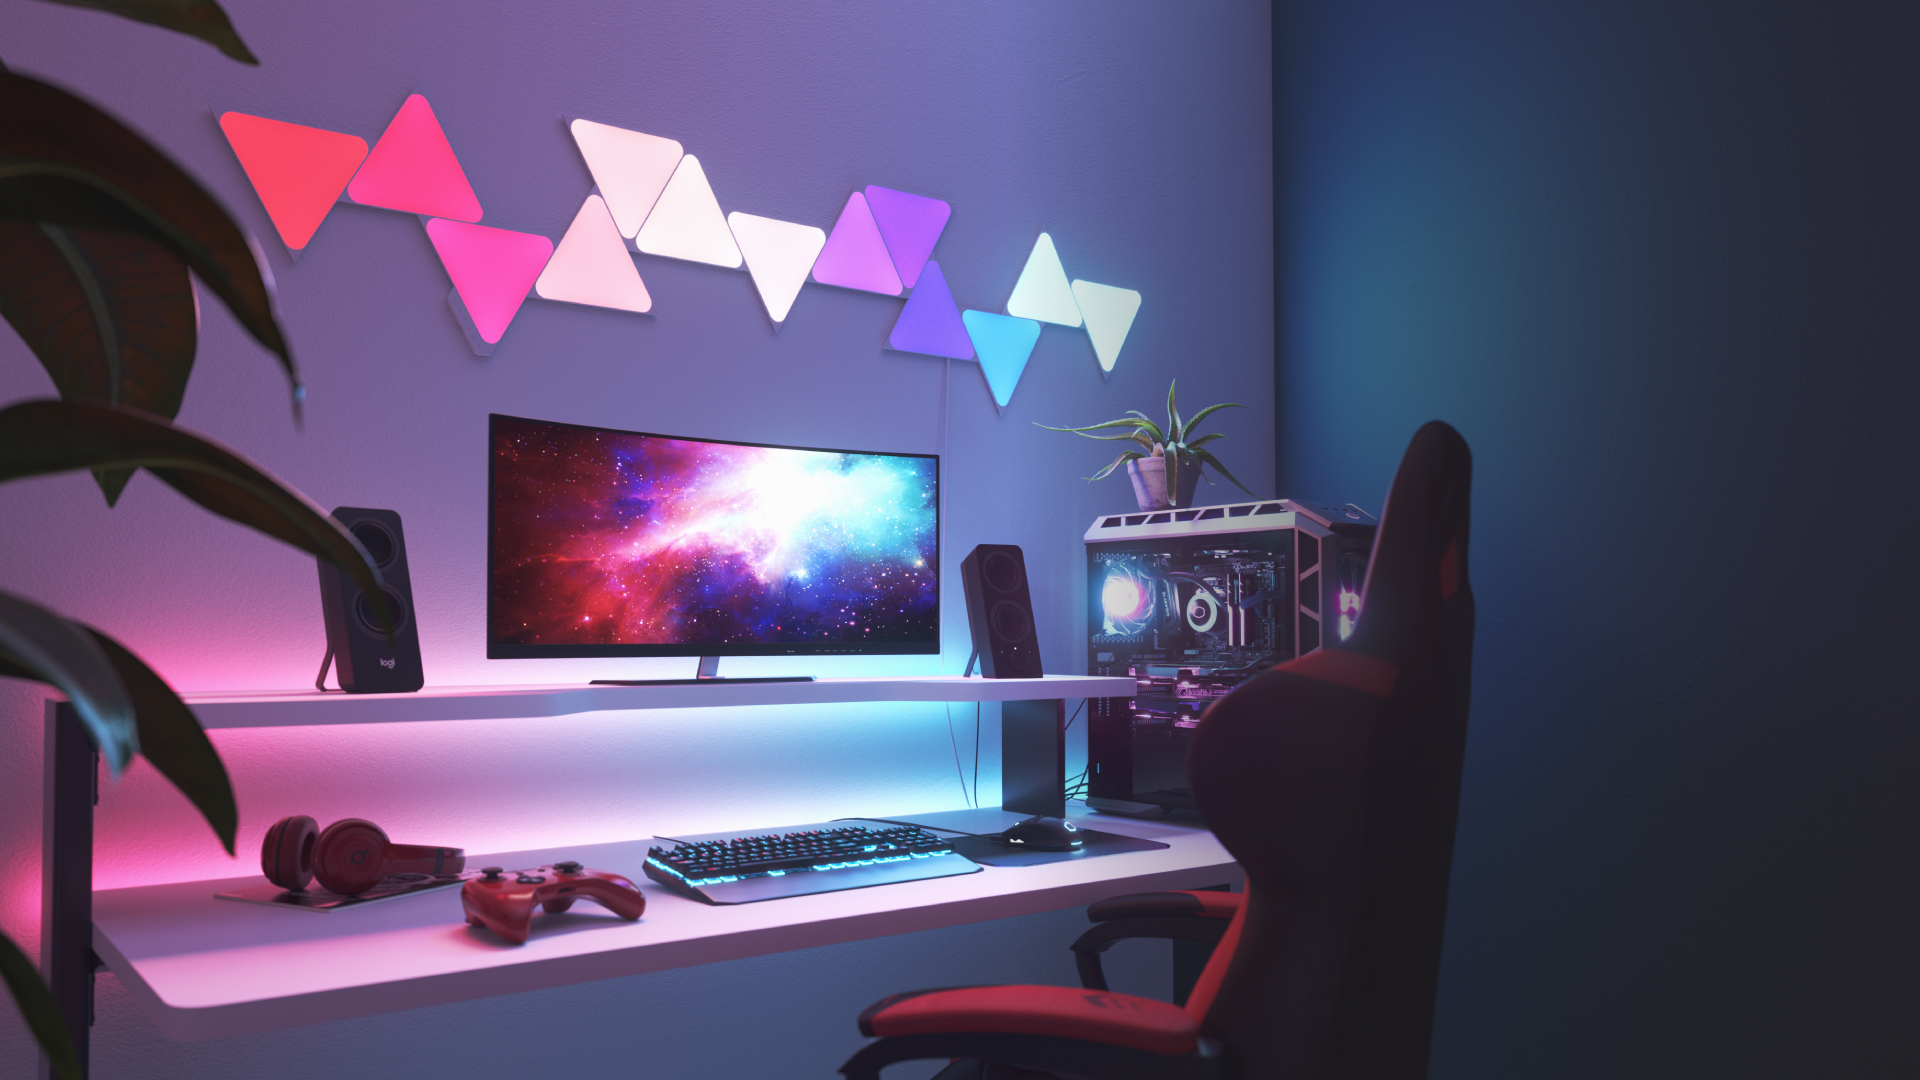 This is an image of a 13 panel layout of Nanoleaf Shapes Triangles on the wall above the desk and behind the monitor in a gaming battlestation. These color changing lights have over 16 million colors and are perfect for the gamer in your home.